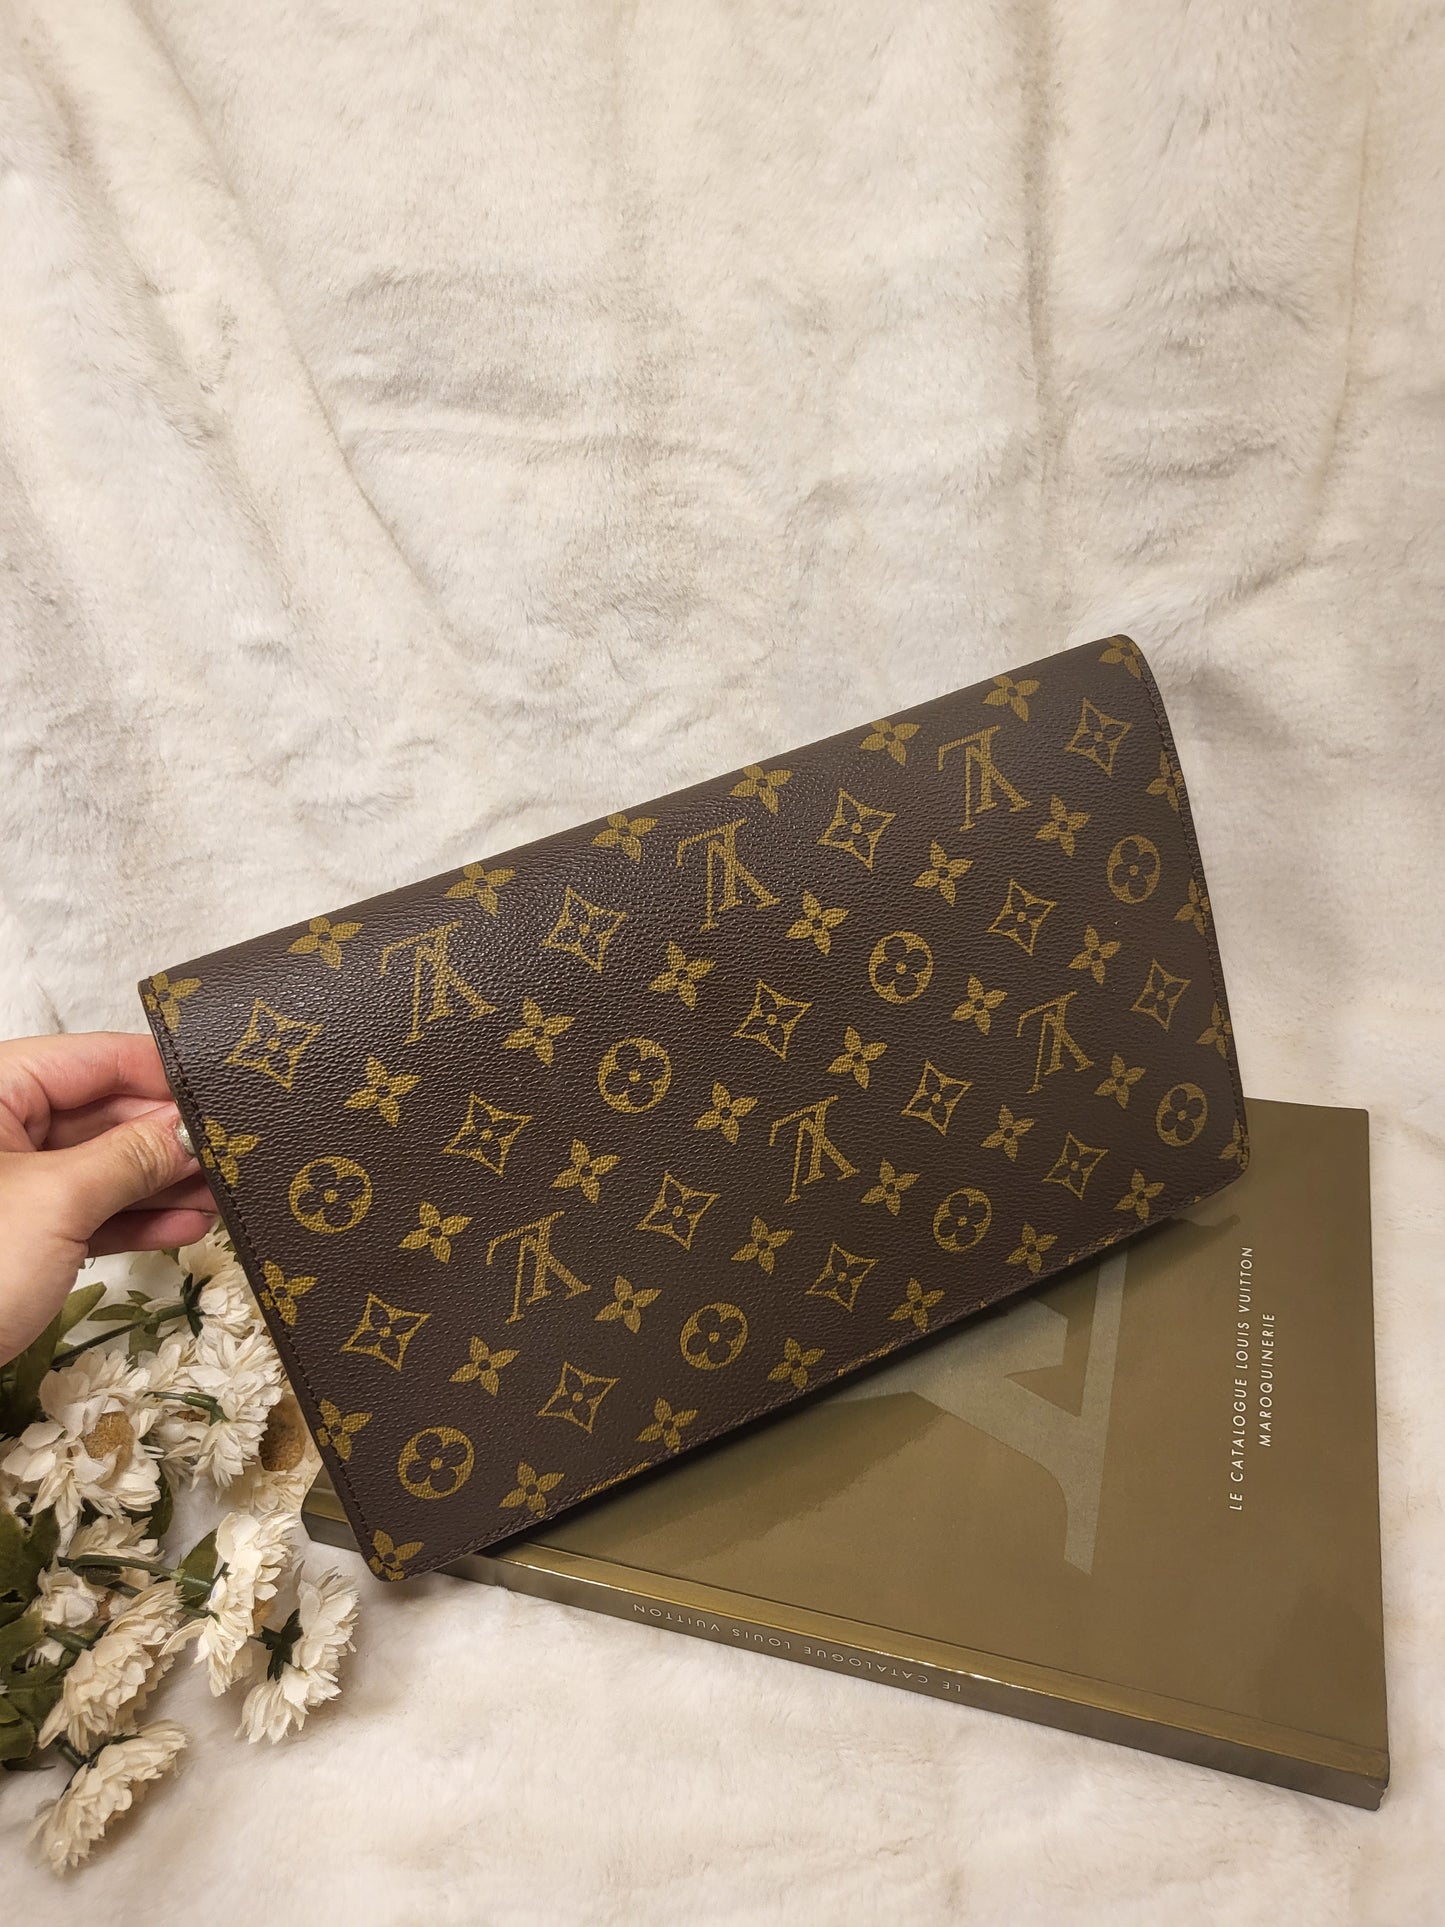 Authentic pre-owned Louis Vuitton chaillot clutch